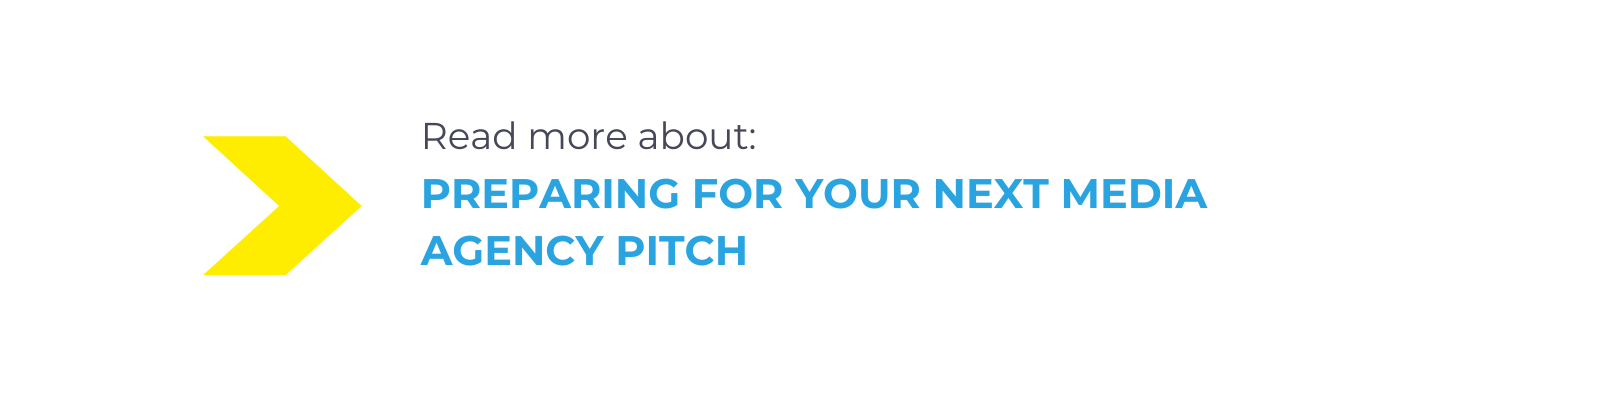 Preparing for your next media agency pitch